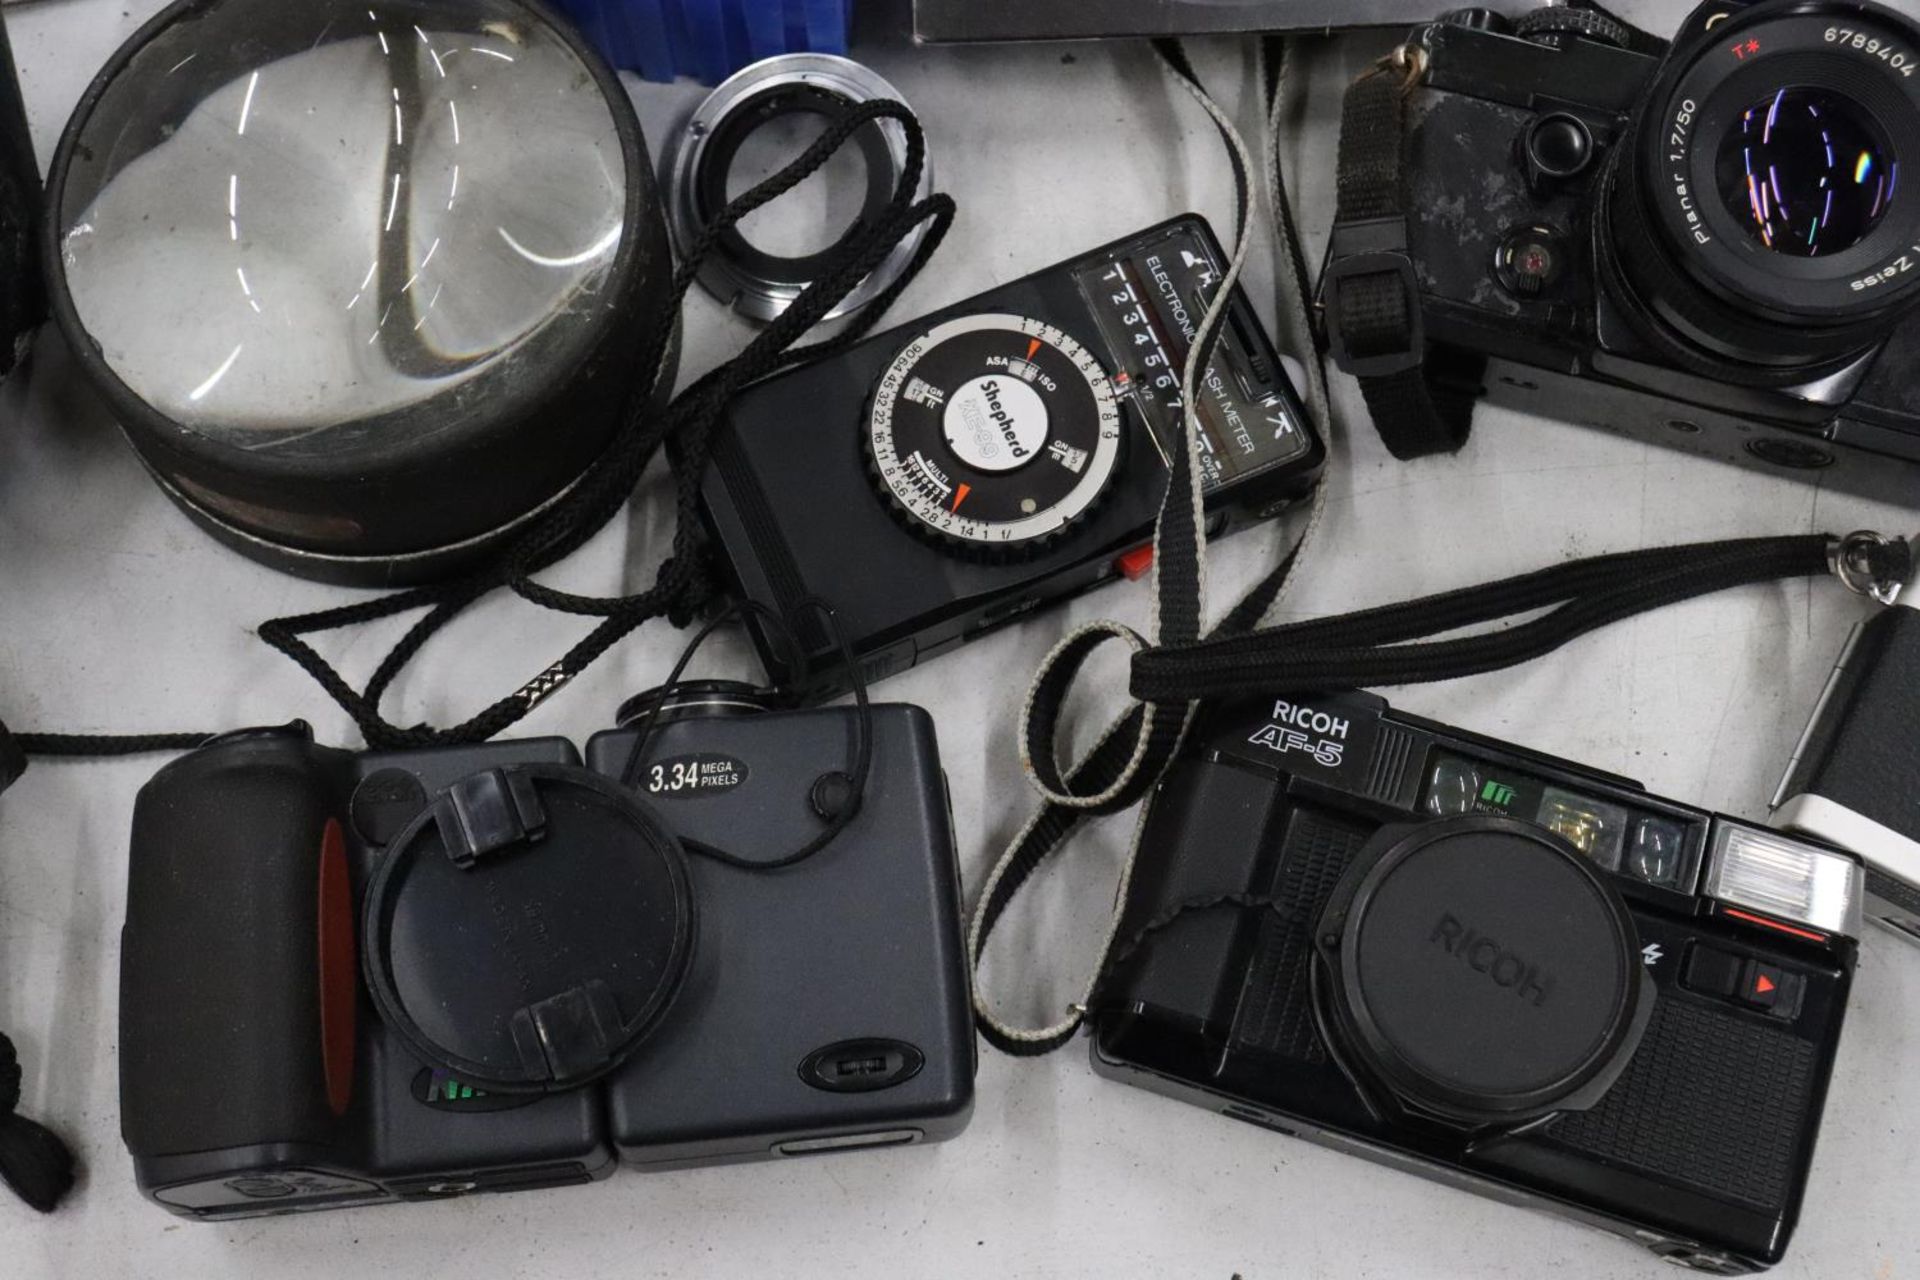 A COLLECTION OF VINTAGE CAMERAS, ETC TO INCLUDE A CONTAX WITH A CARL ZEISS LENS, RICOH AF-5, NIKON - Image 2 of 8